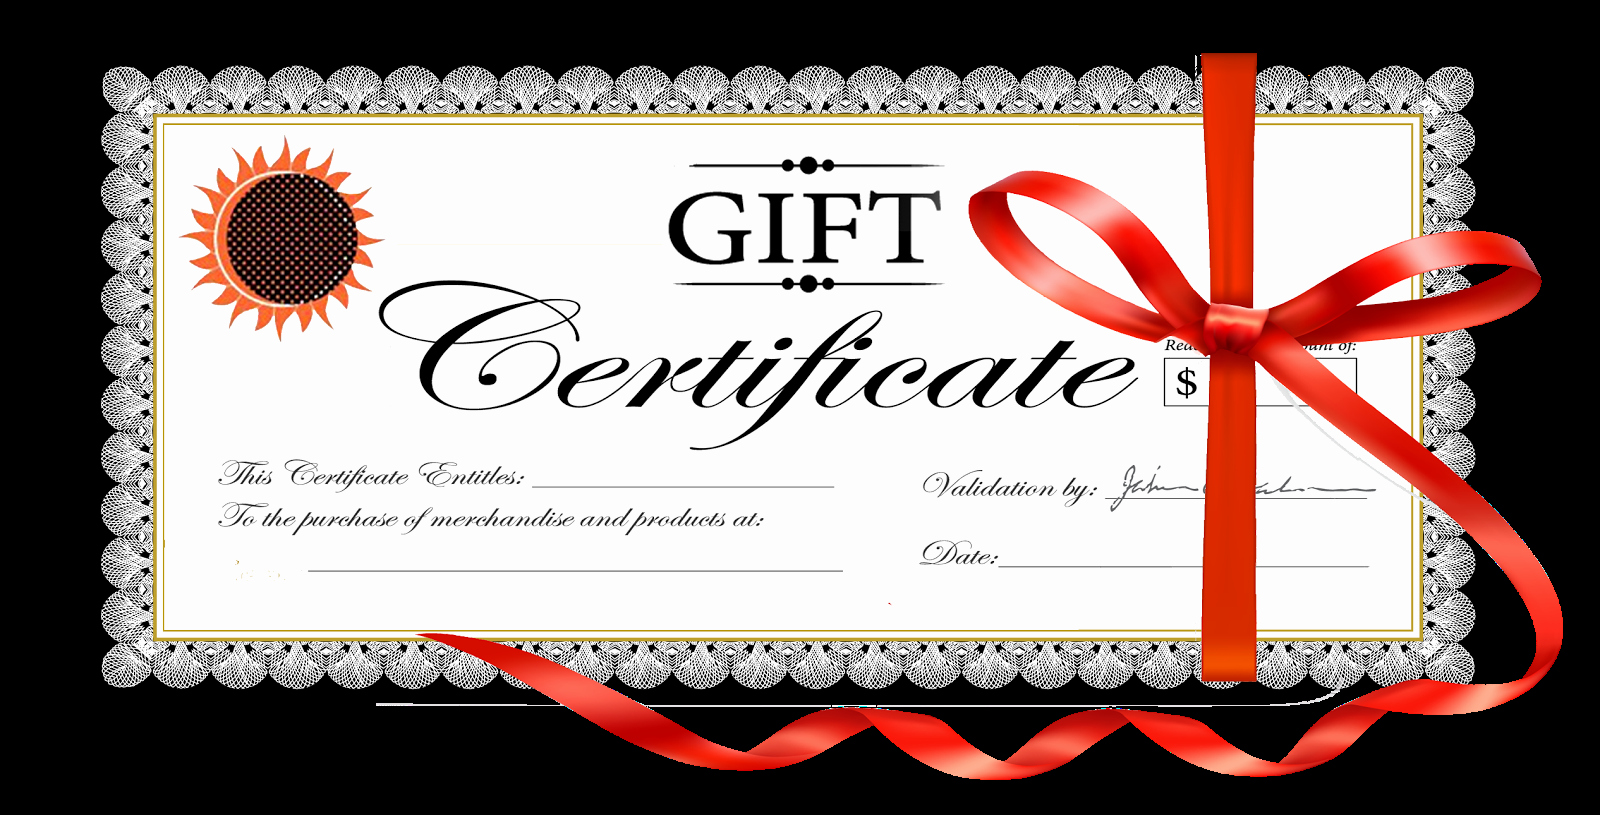 Gift Certificate Samples Free Templates Best Of 18 Gift Certificate Templates Excel Pdf formats